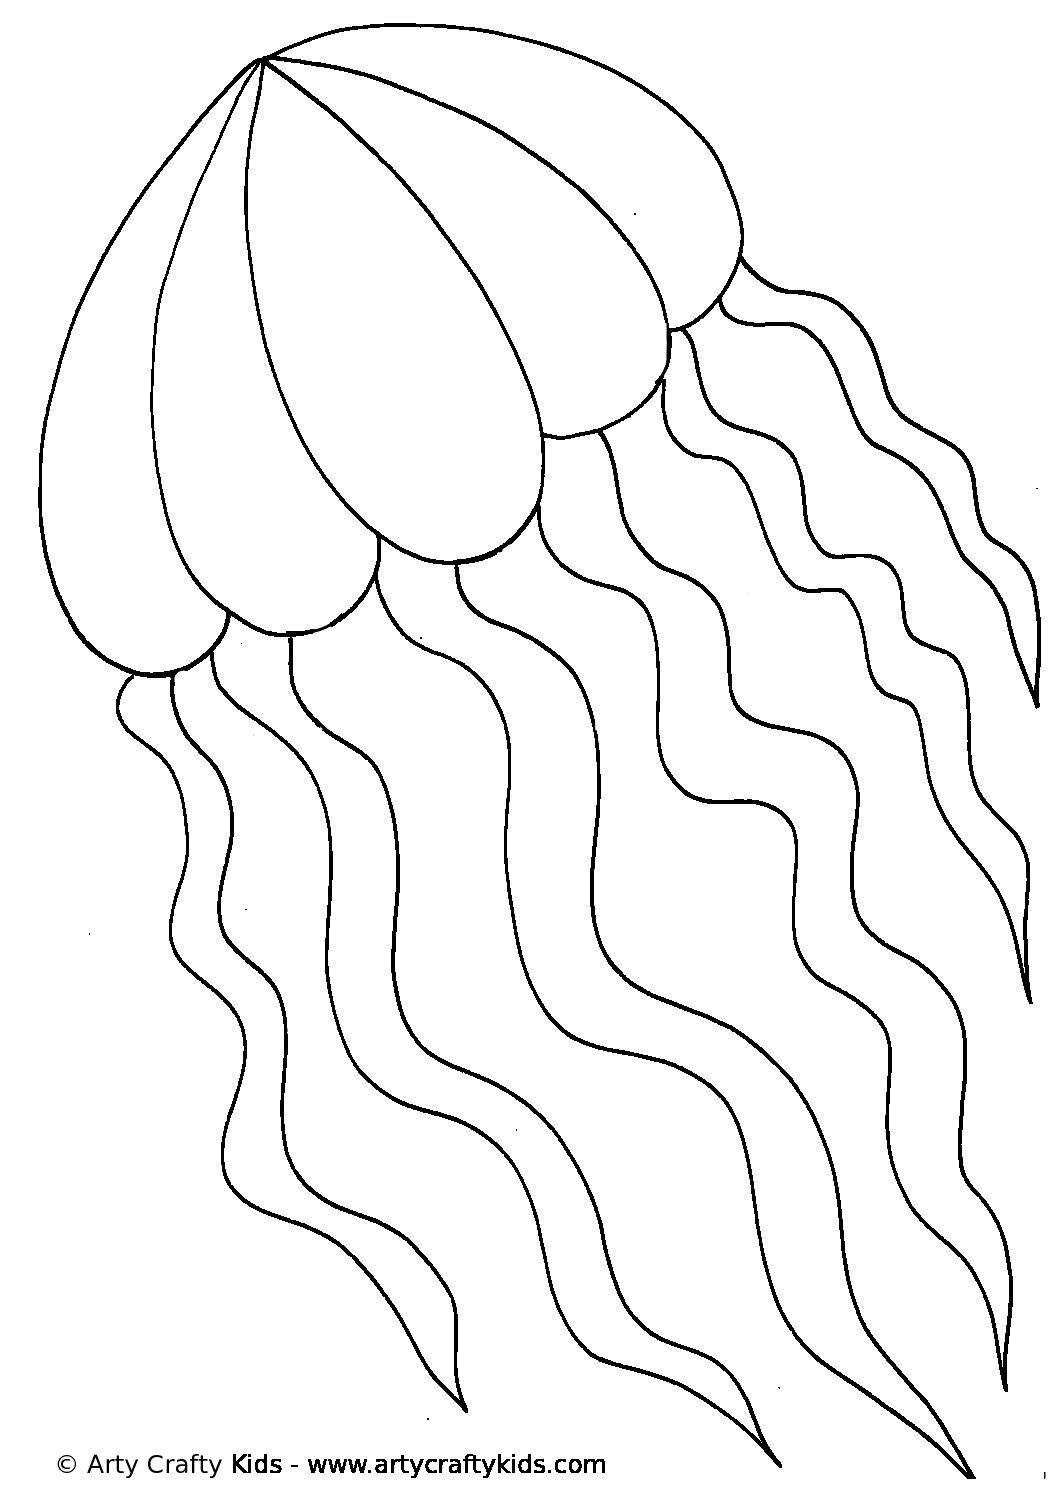 Jellyfish Outline Template Sketch Coloring Page